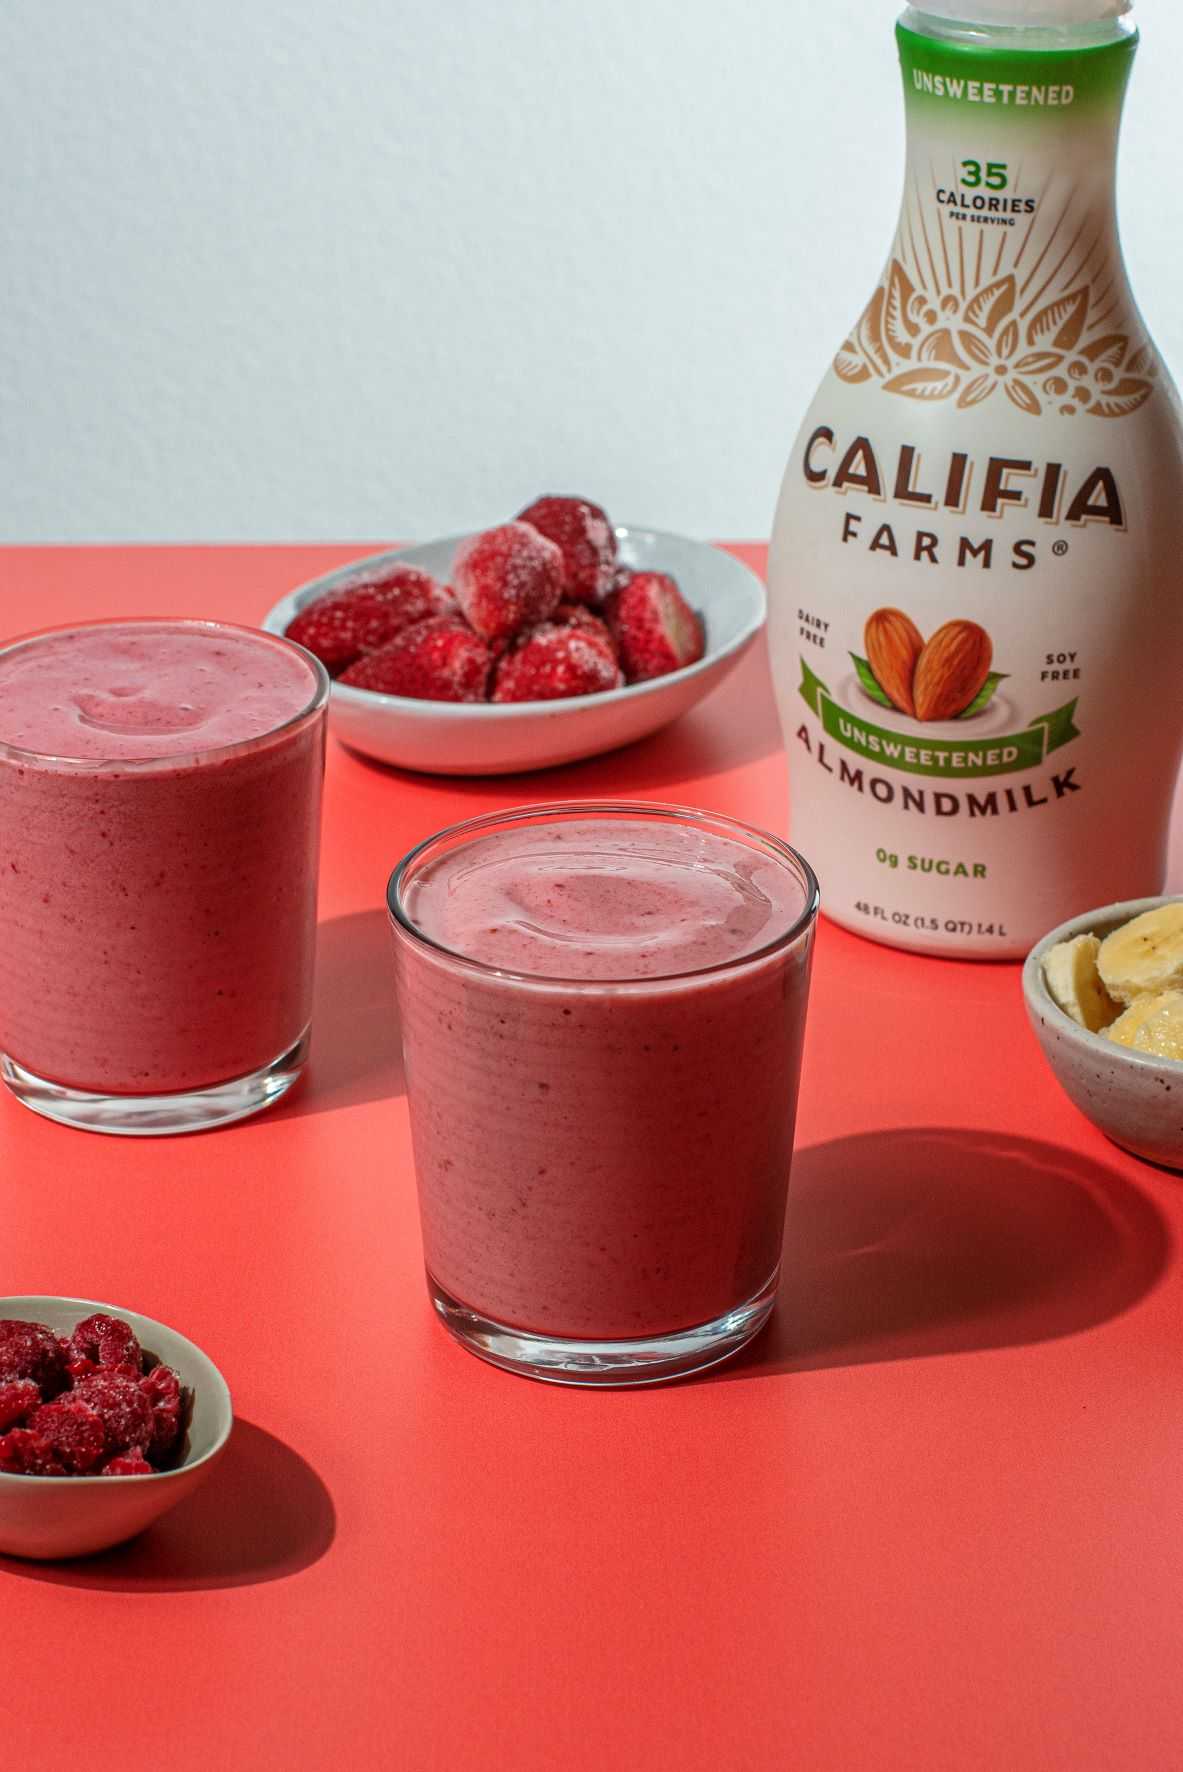 Smoothie sits in a glass at the center of the image with Califia Farms Unsweetened Almondmilk off to the side.